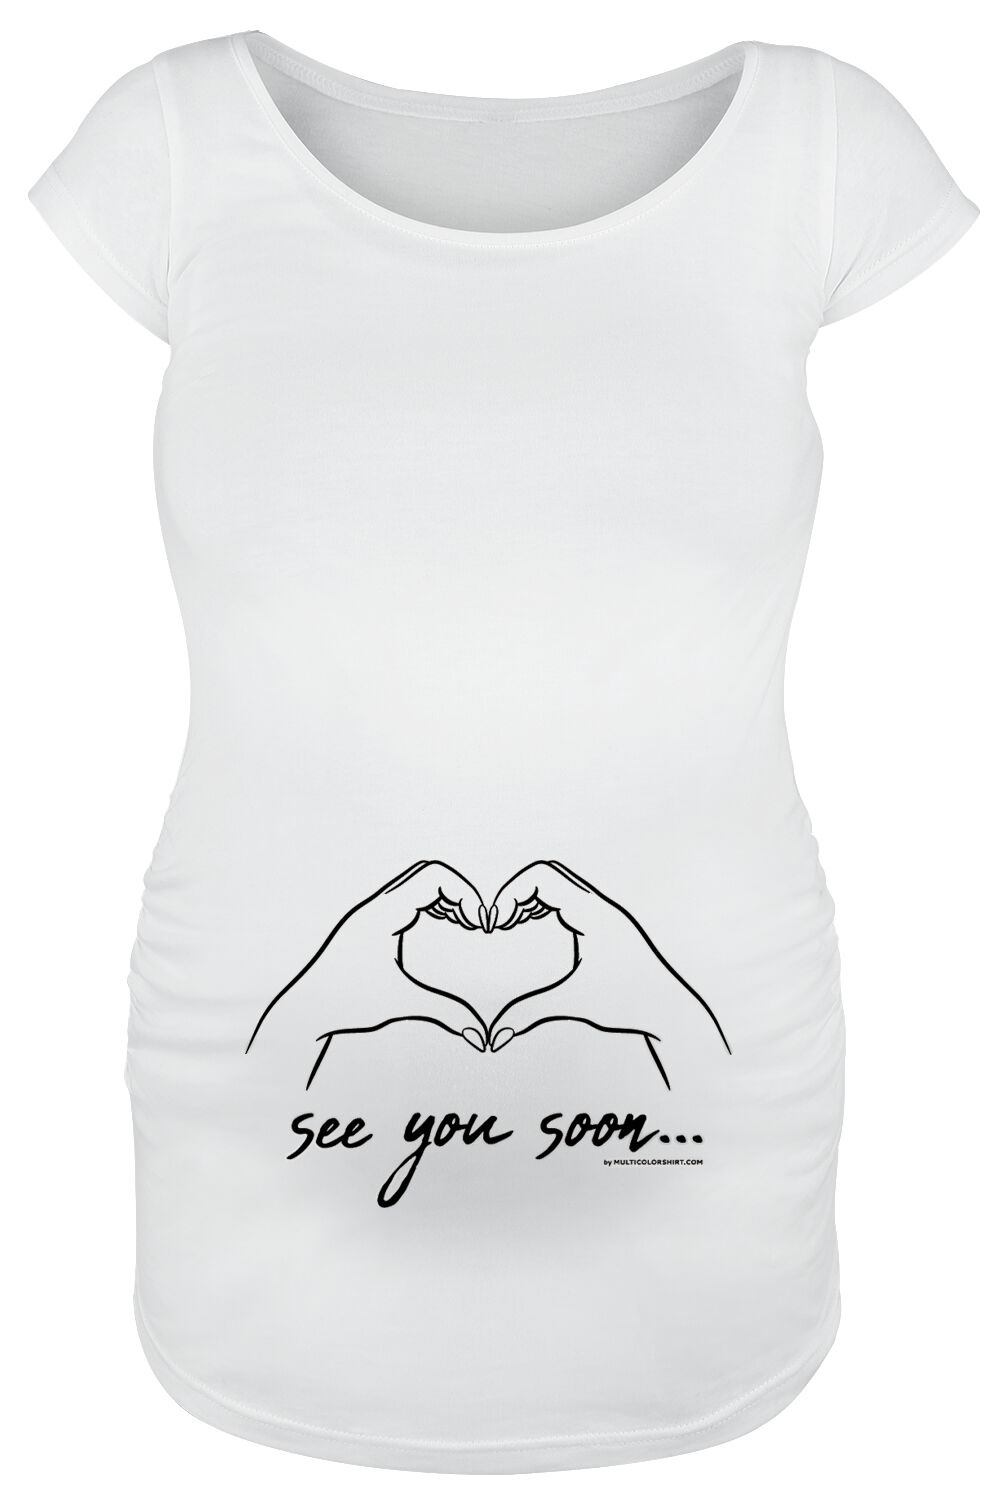 Maternity fashion See You Soon ... T-Shirt white